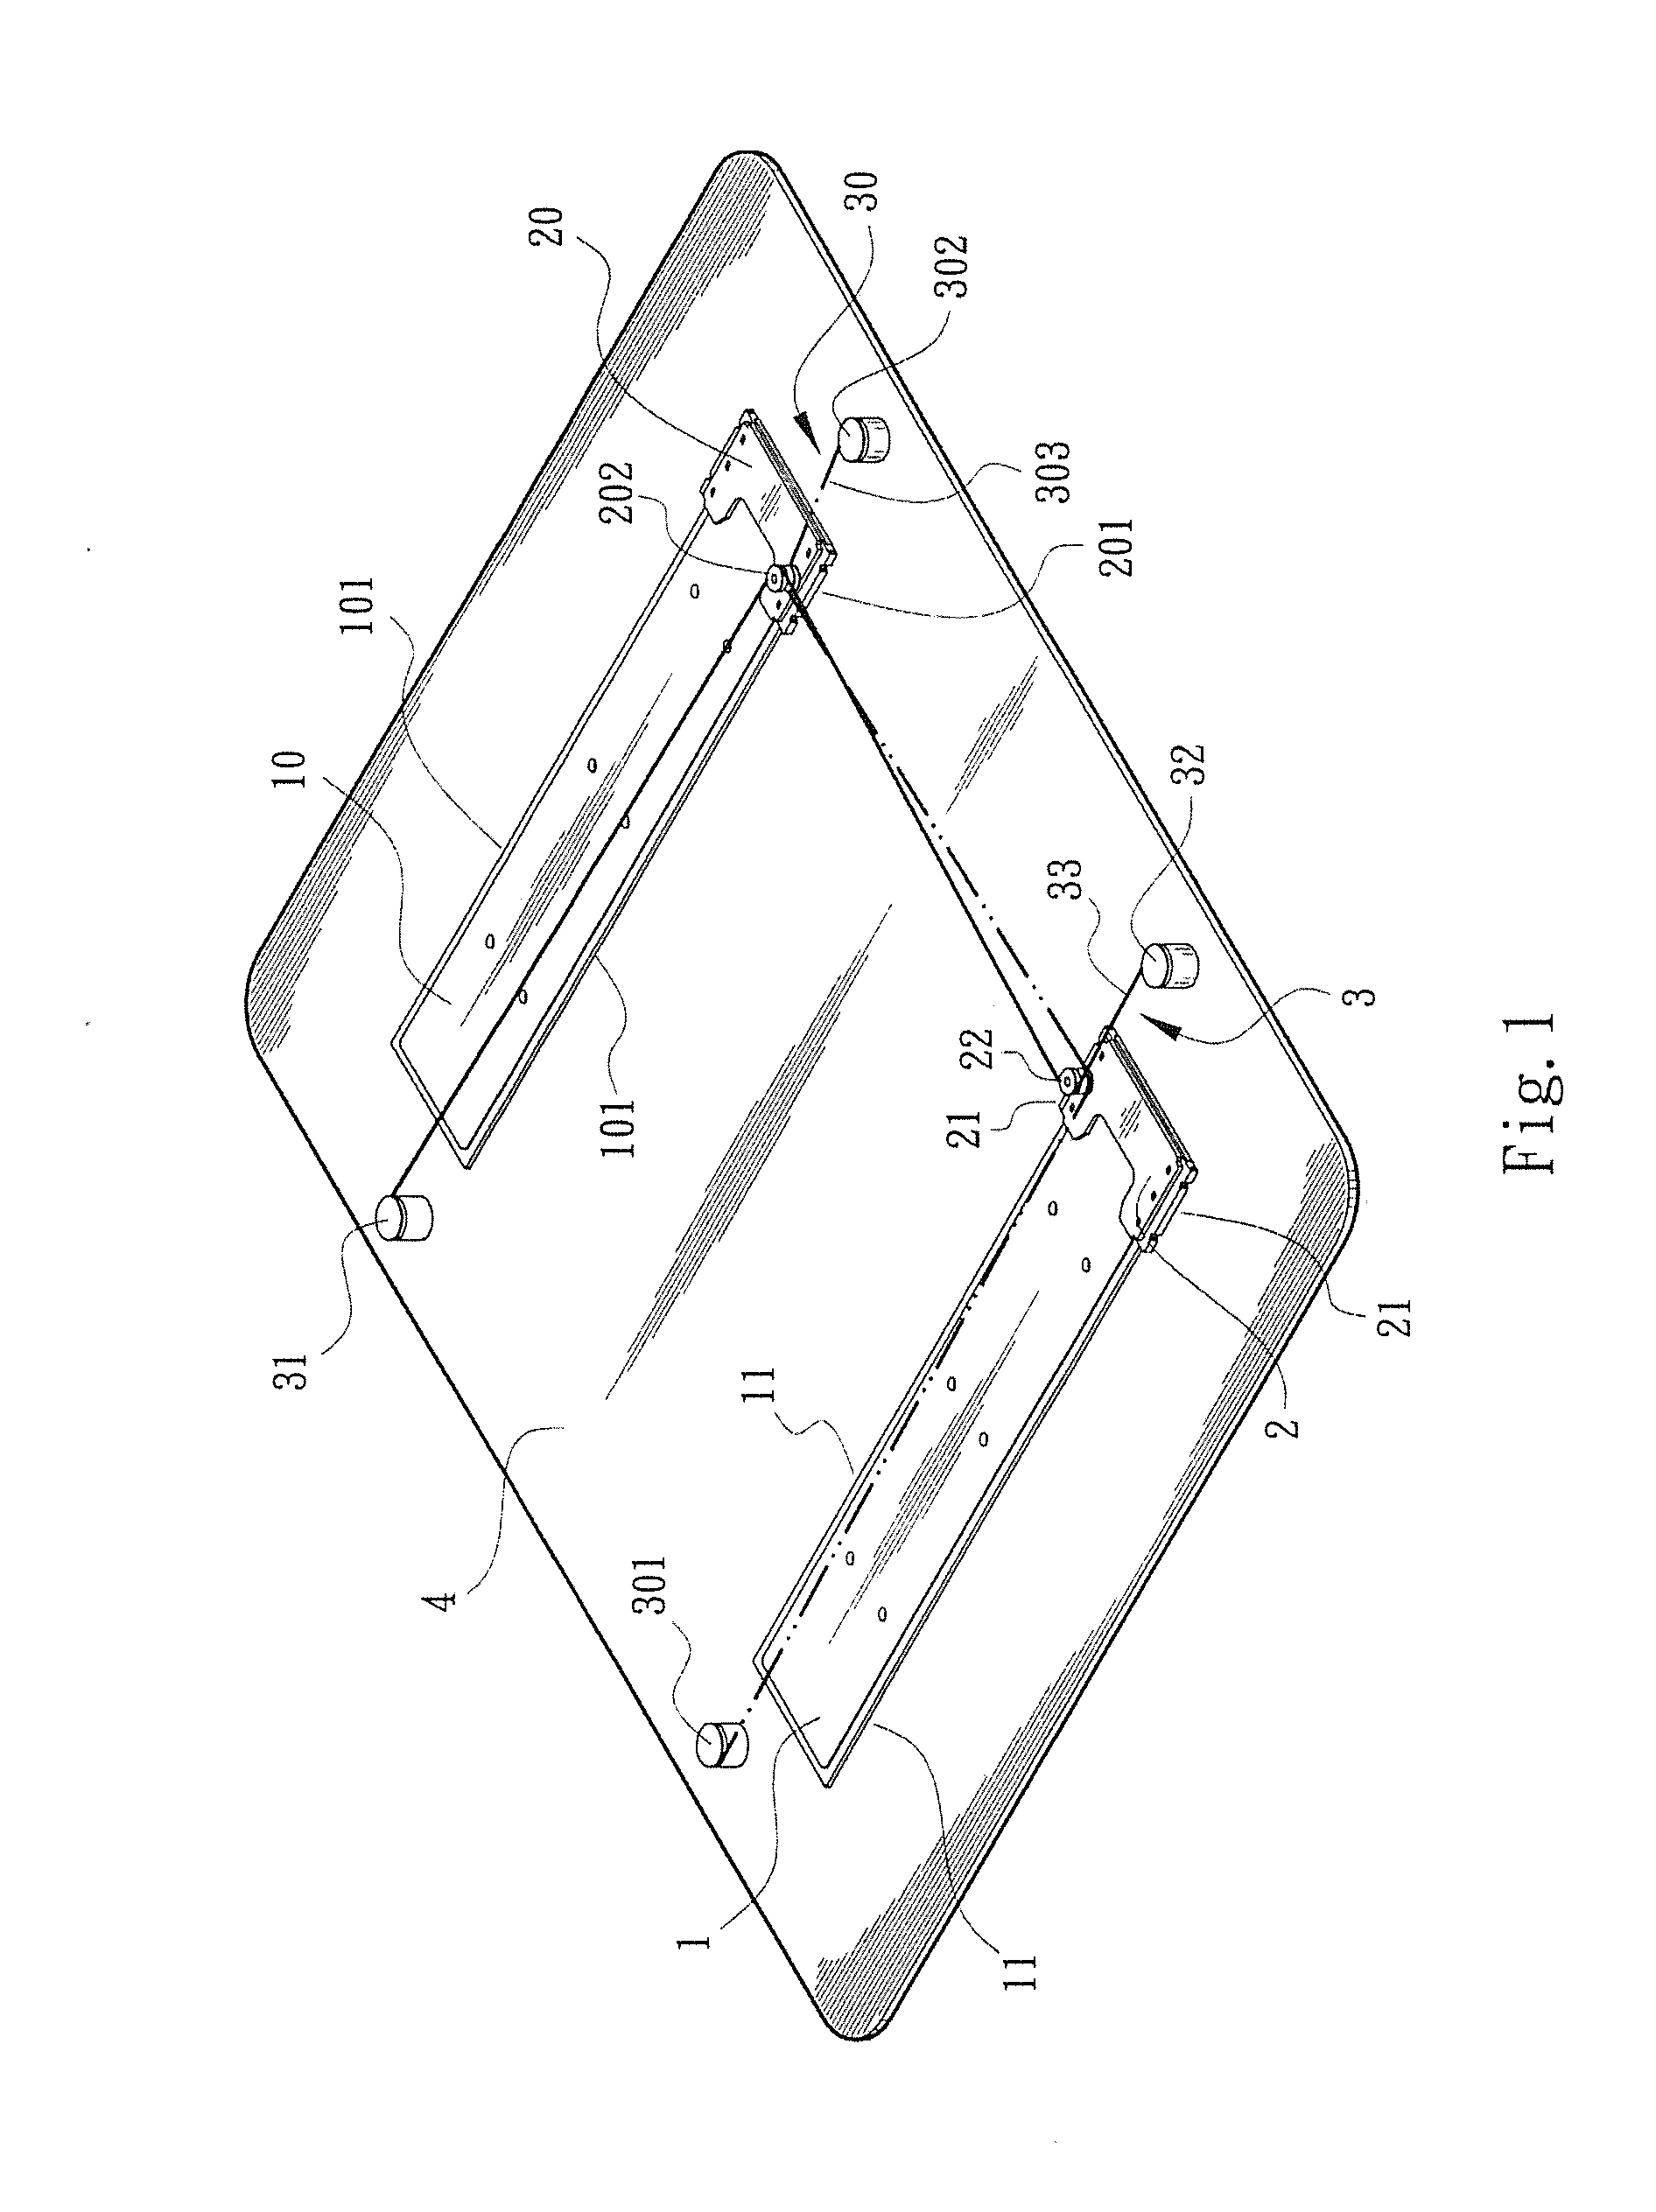 Synchronous drive device for slide cover mechanism